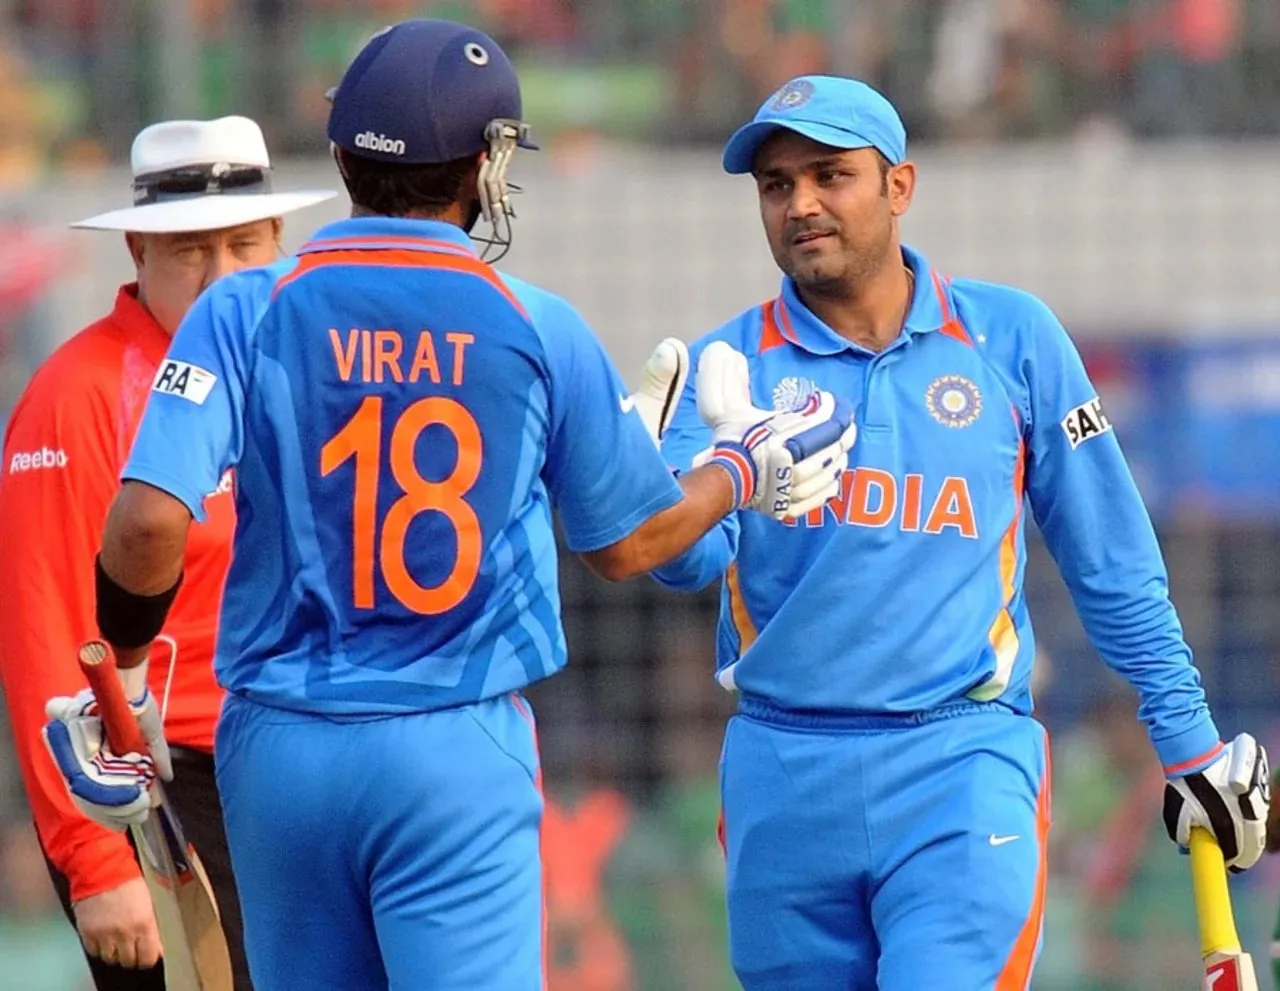 Virat Kohli congratulating Virender Sehwag on completing his hundred in just 94 balls in 2011 World Cup.  Image: AFP